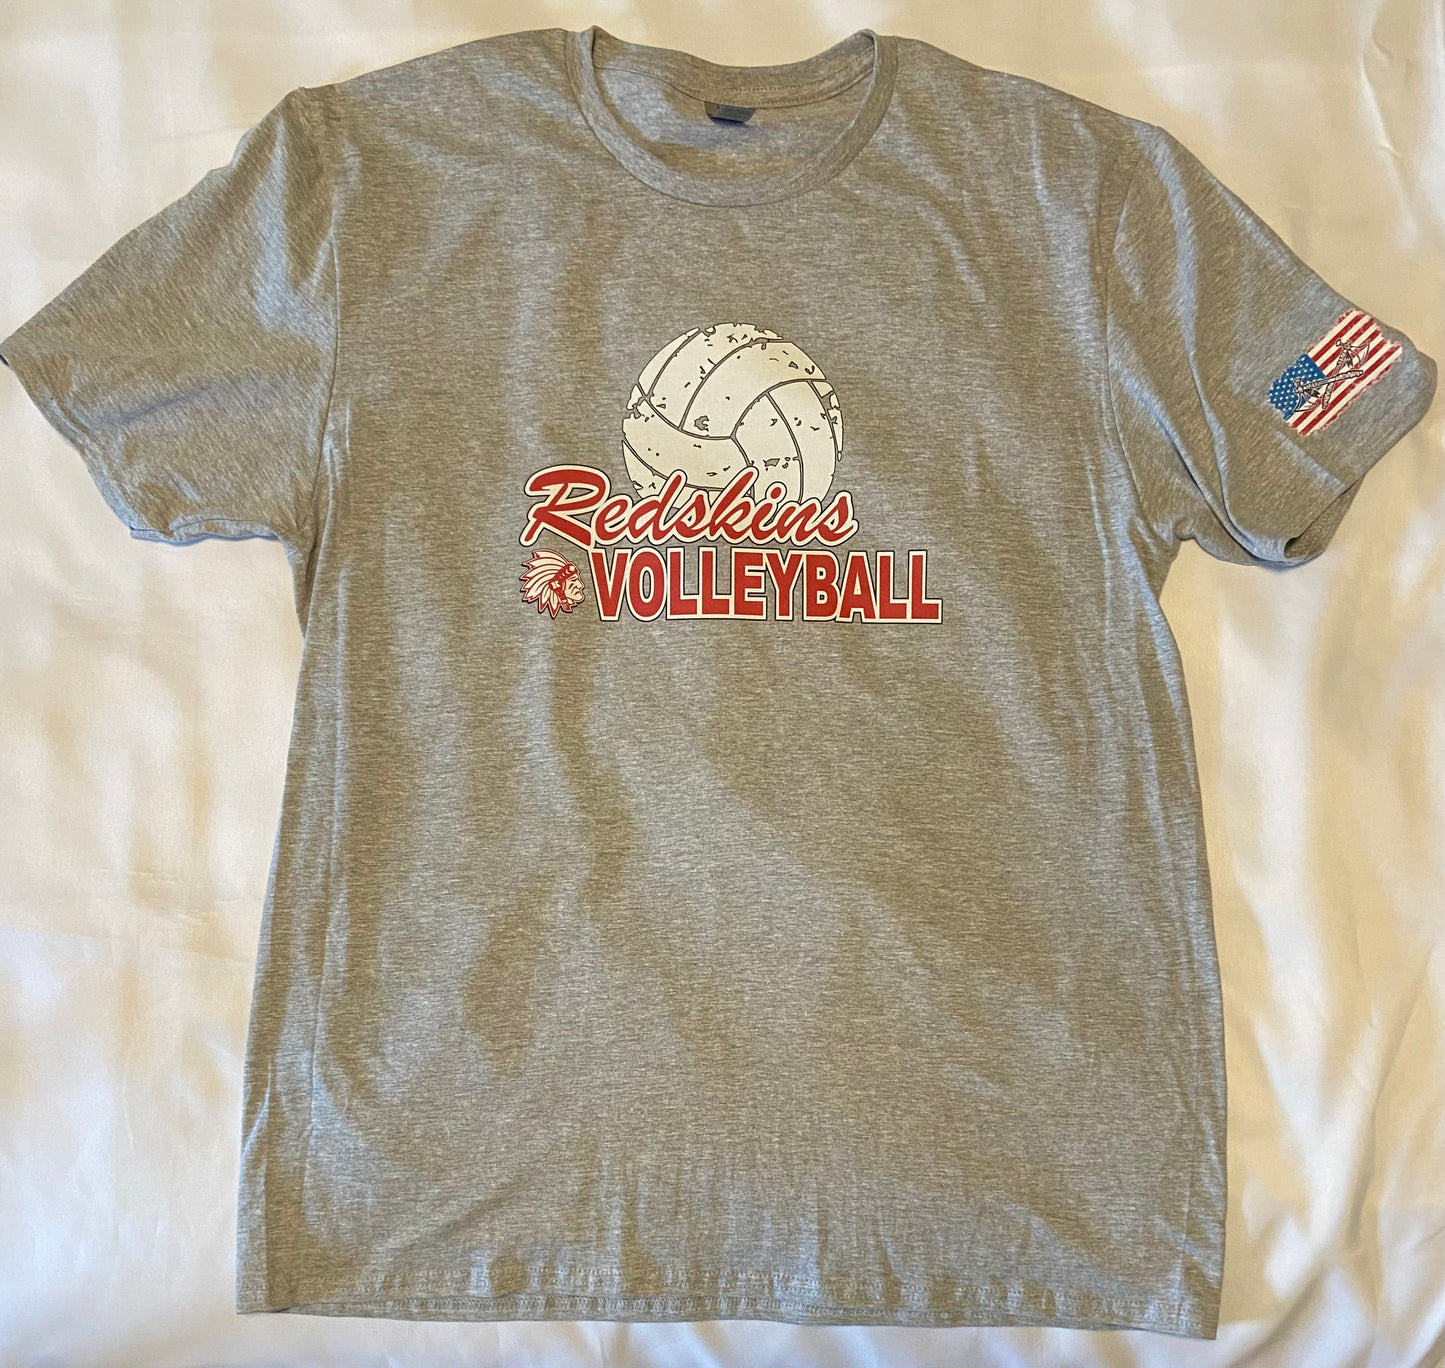 Knox Redskins VOLLEYBALL Team T-shirt - Grey - Adult and Youth Sizes